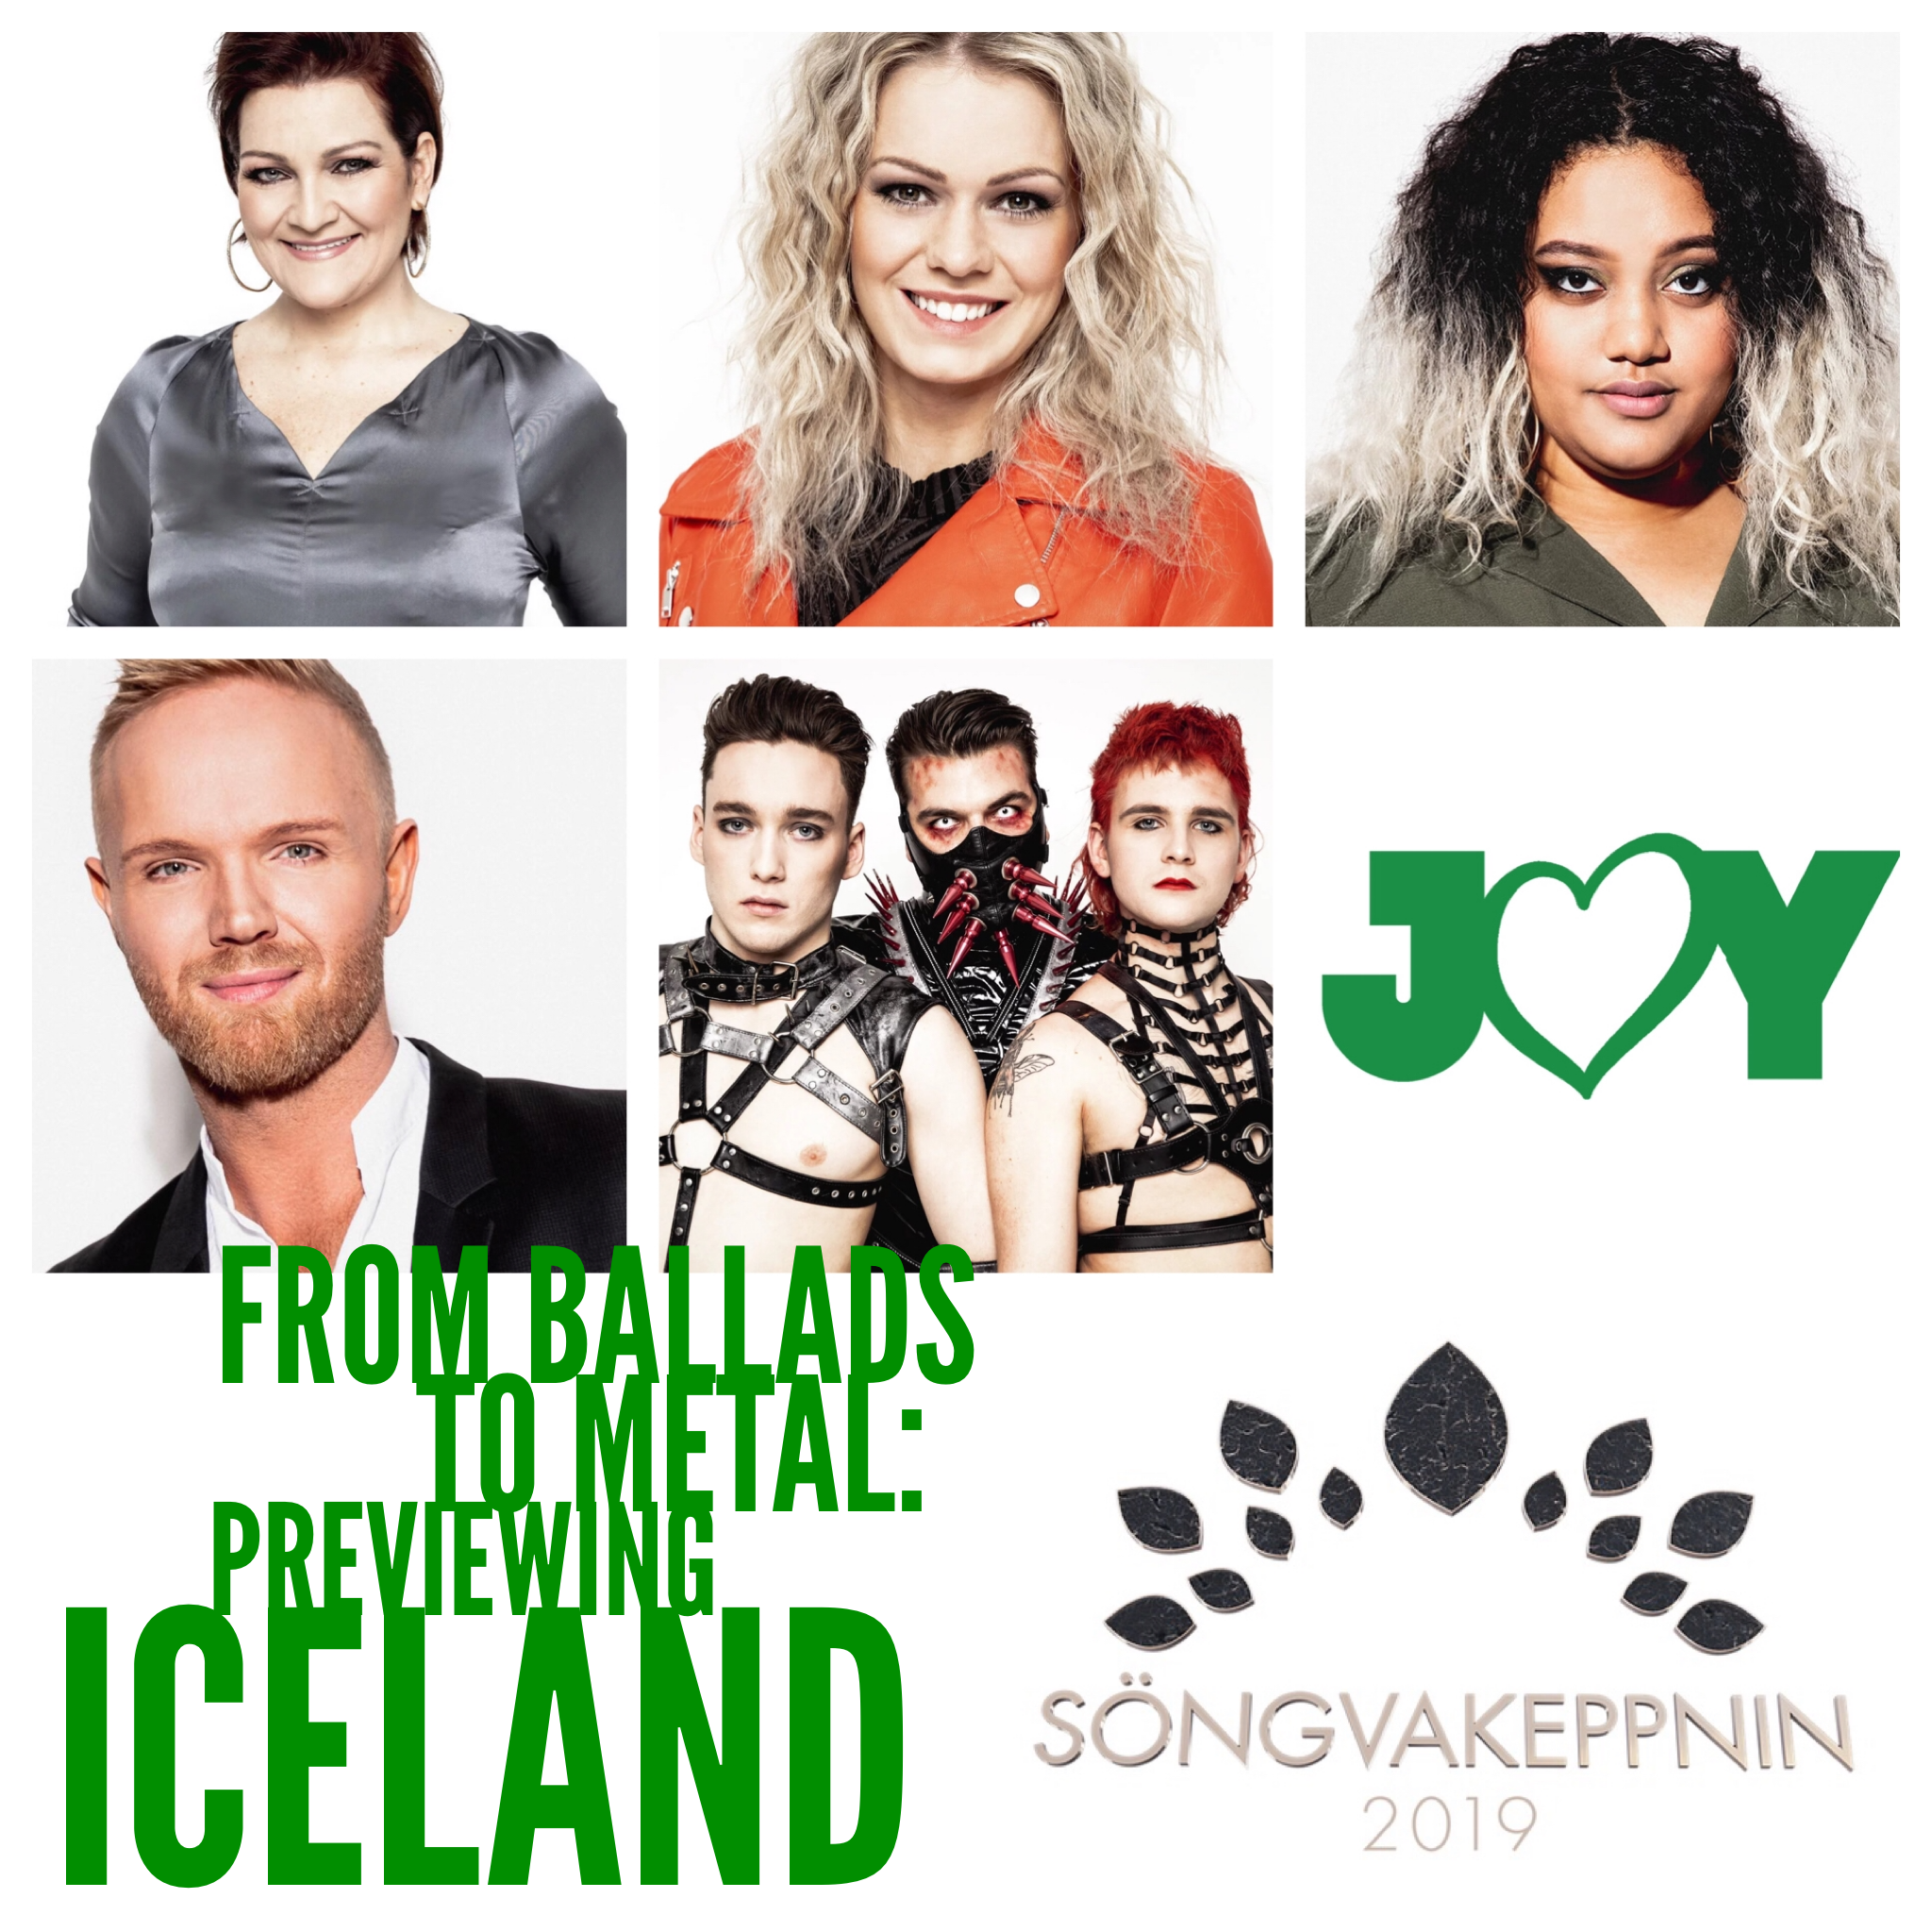 From ballads to metal: Previewing Iceland’s Söngvakeppnin